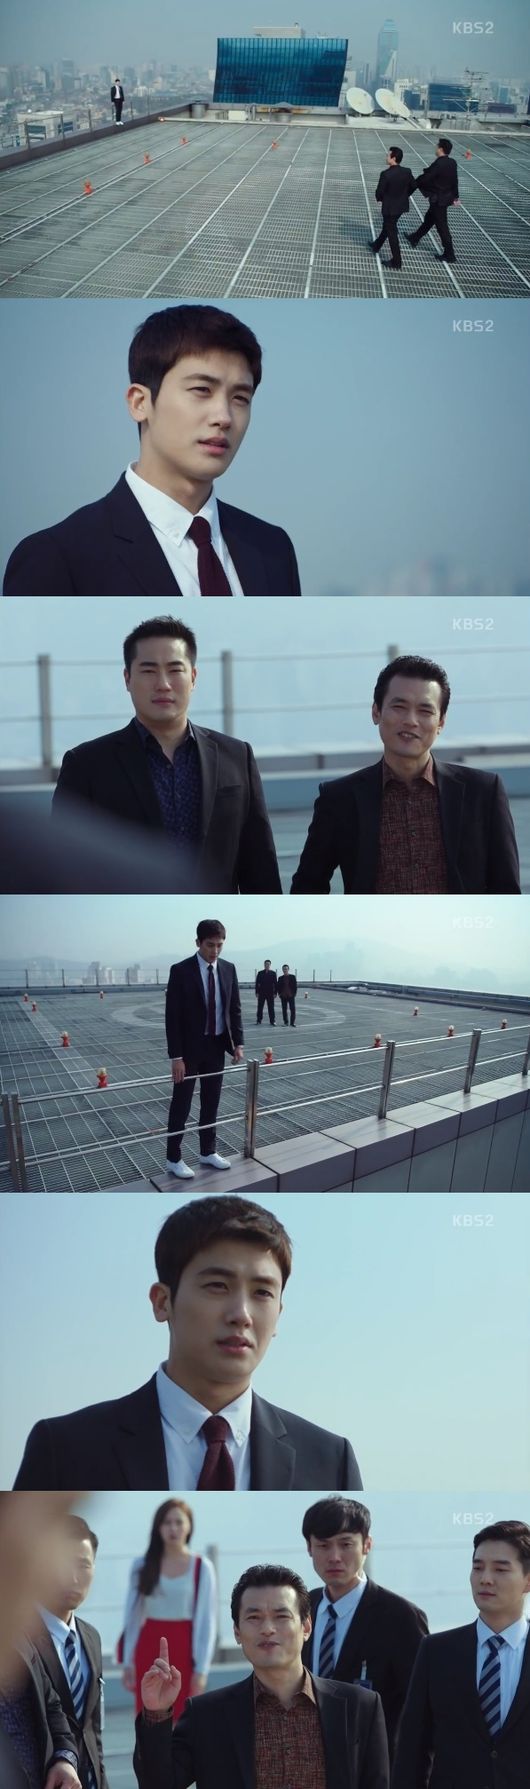 Suits Park Hyung-sik staged a Daechi station on the rooftop with Gangsters. On KBS2s Drama Suits, which was broadcast on the 2nd, Ko Yeon-woo (Park Hyung-sik) was shown encountering Gangsters who visited Law Firm Gang & Ham to find Drug. I met Park Joon-pyo (Lee Kyung-min) who was a chaebol in a club where Sang-boon worked, and experienced being chased by detectives while delivering Drug to Park Joon-pyo.As a result, he met Miniforce Seok (Jang Dong-gun) and passed as a new lawyer. After that, Ko Yeon-woo hid Drug in a subway storage box and removed his bag.However, as the iron was caught by the Gangsters, the position of the high-ranking was discovered. The high-ranking man who ran to the roof of the Law Firm stood at risk on the railing, I was dragged to the end of the day anyway.If you carry something that you should not be in the world, do you not know?Gangsters said, Now you have your life with me and youre Blackmail – Cinémix Par Chloé?And Ko Yeon-woo said,Yeah, Im just about to die, but youre going to be murder suspects.Blackmail – Cinémix Par Chloé or whatever you are to fuck with. Even with the pride of the high-ranking, the Gangsters did not back down, and as soon as Ko Yeon-woo closed his eyes and stepped on, security staff arrived on the roof.Ko Yeon-woo saved his life safely, but this surprised not only Miniforce Seok (Jang Dong-gun), but also Kim Ji-na (Go Sung-hee), the head of the legal assistant, and the Law Firm captured the broadcast screen of Suits.